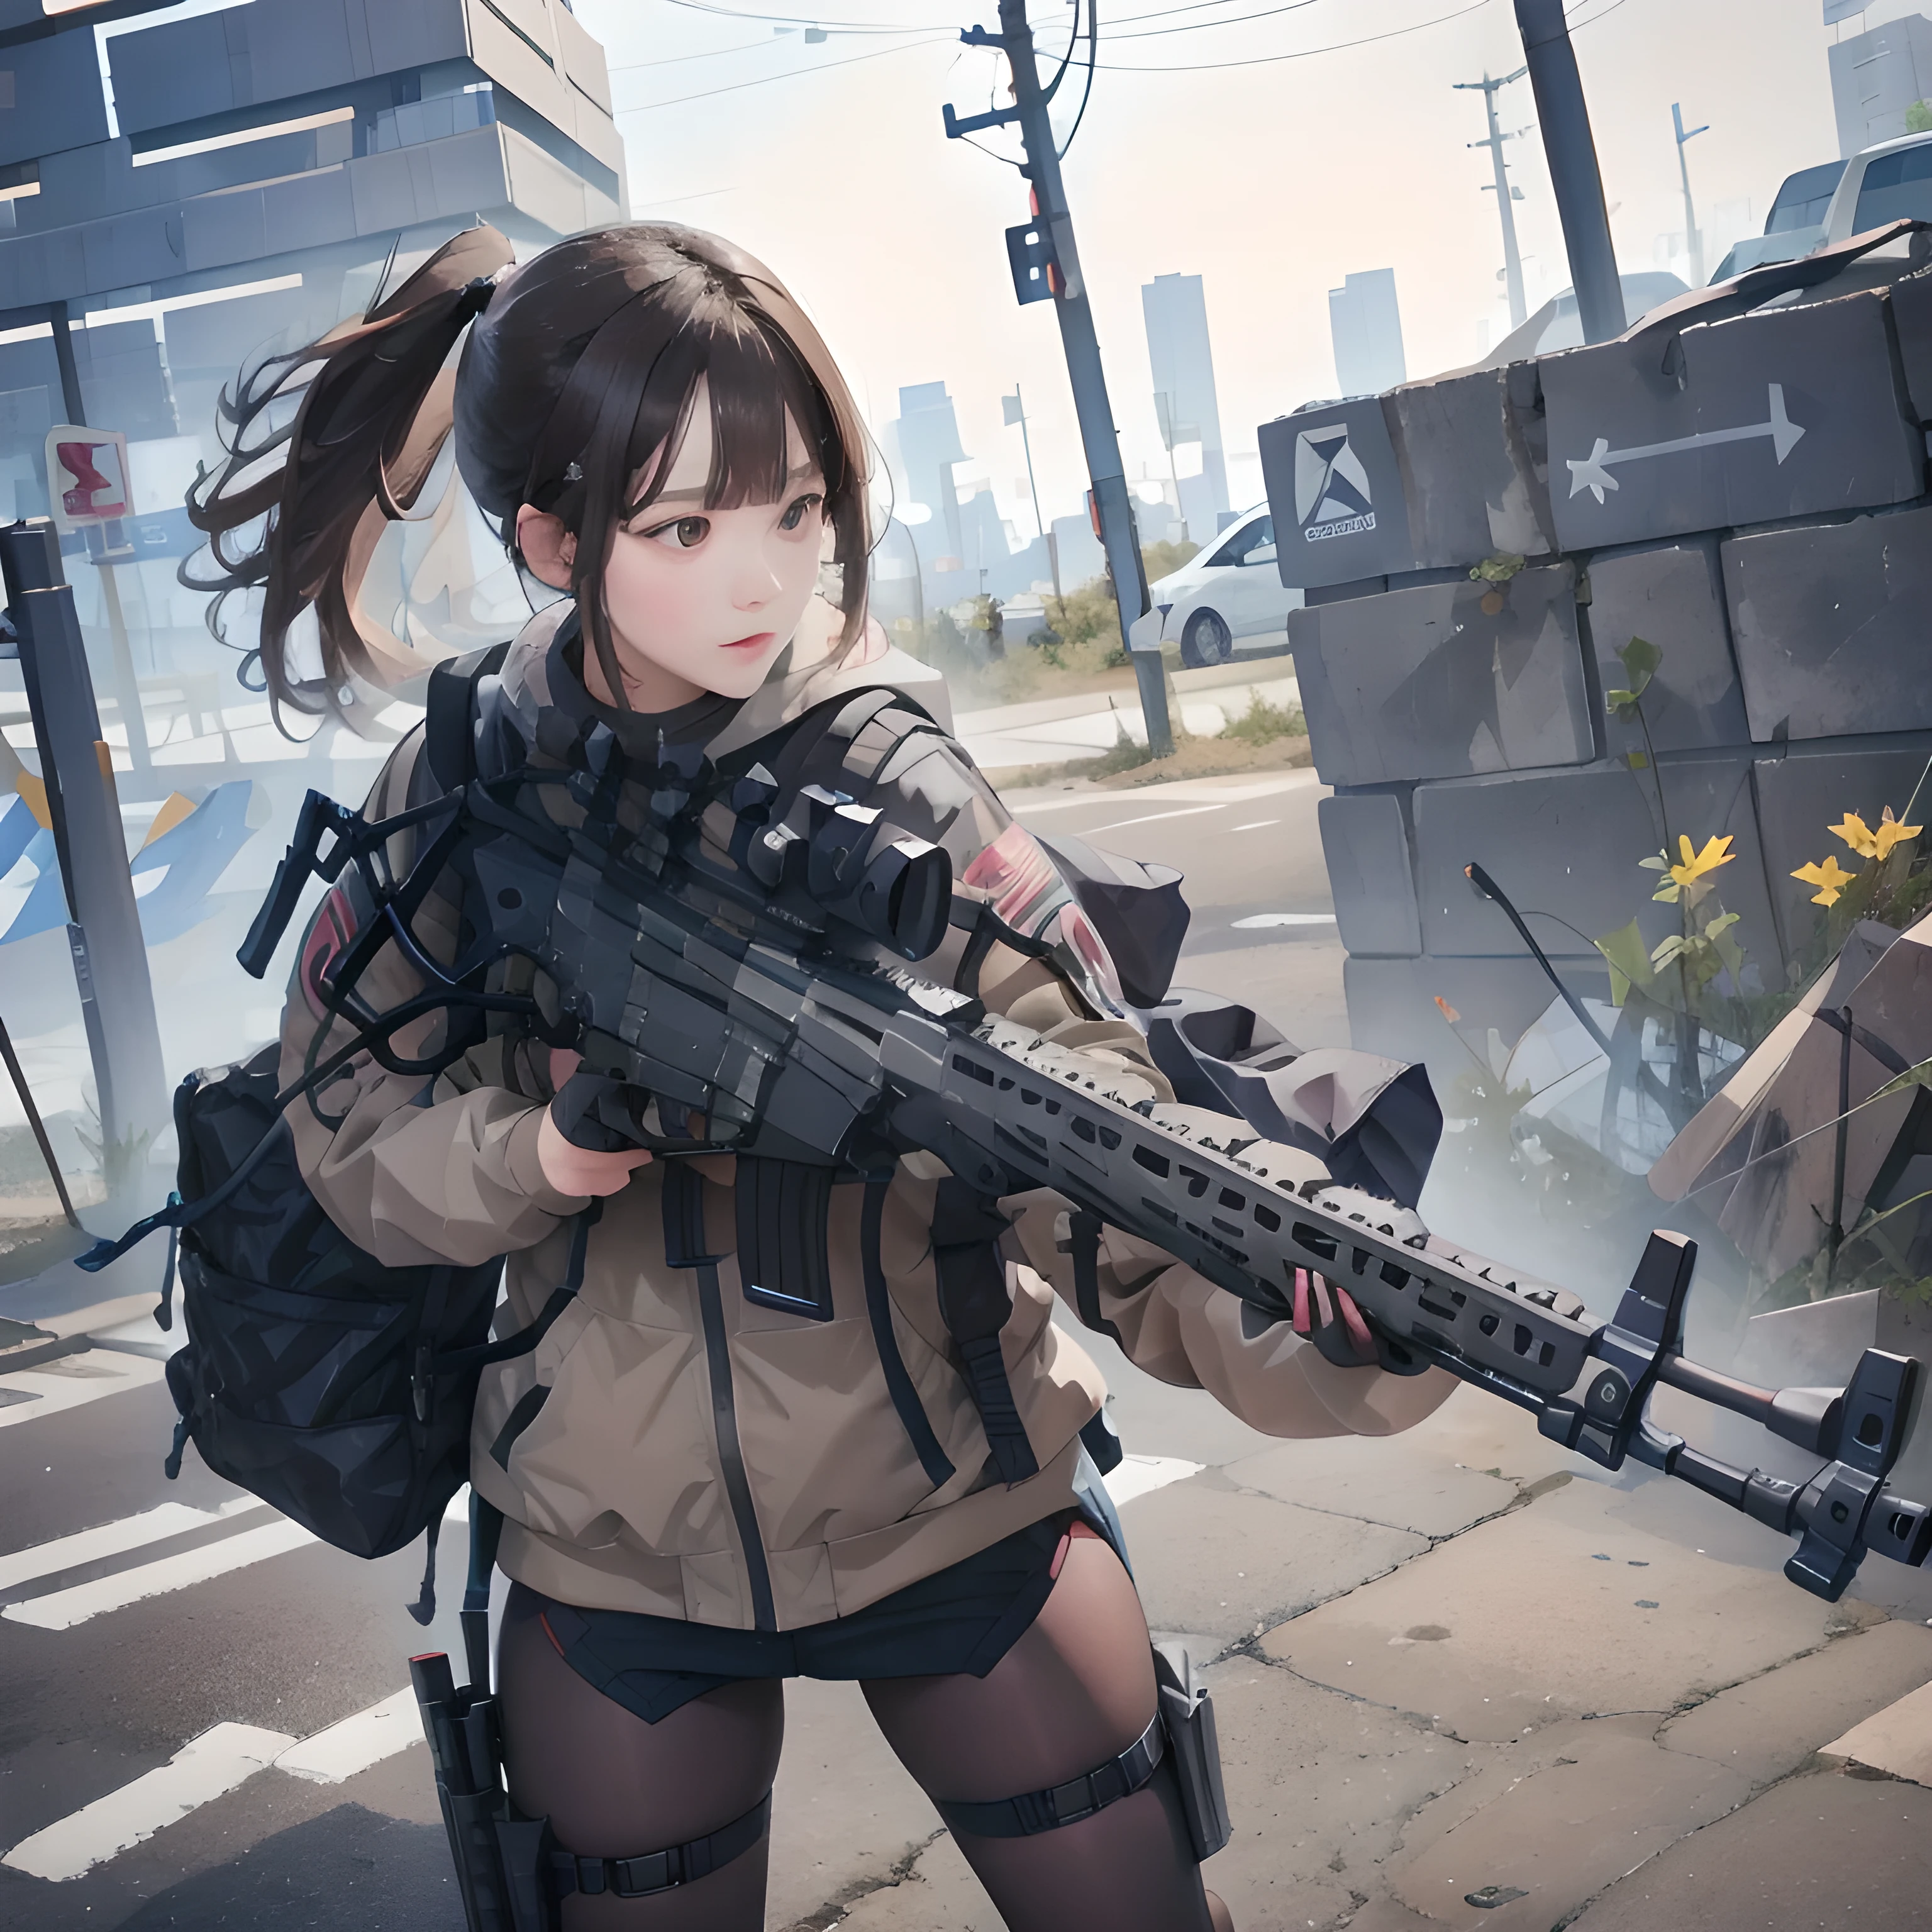 Girl shooting pose, One Girl, Shooting with an assault rifle, Sophisticated Assault Rifle, High-performance assault rifle, Dynamic Perspective, 